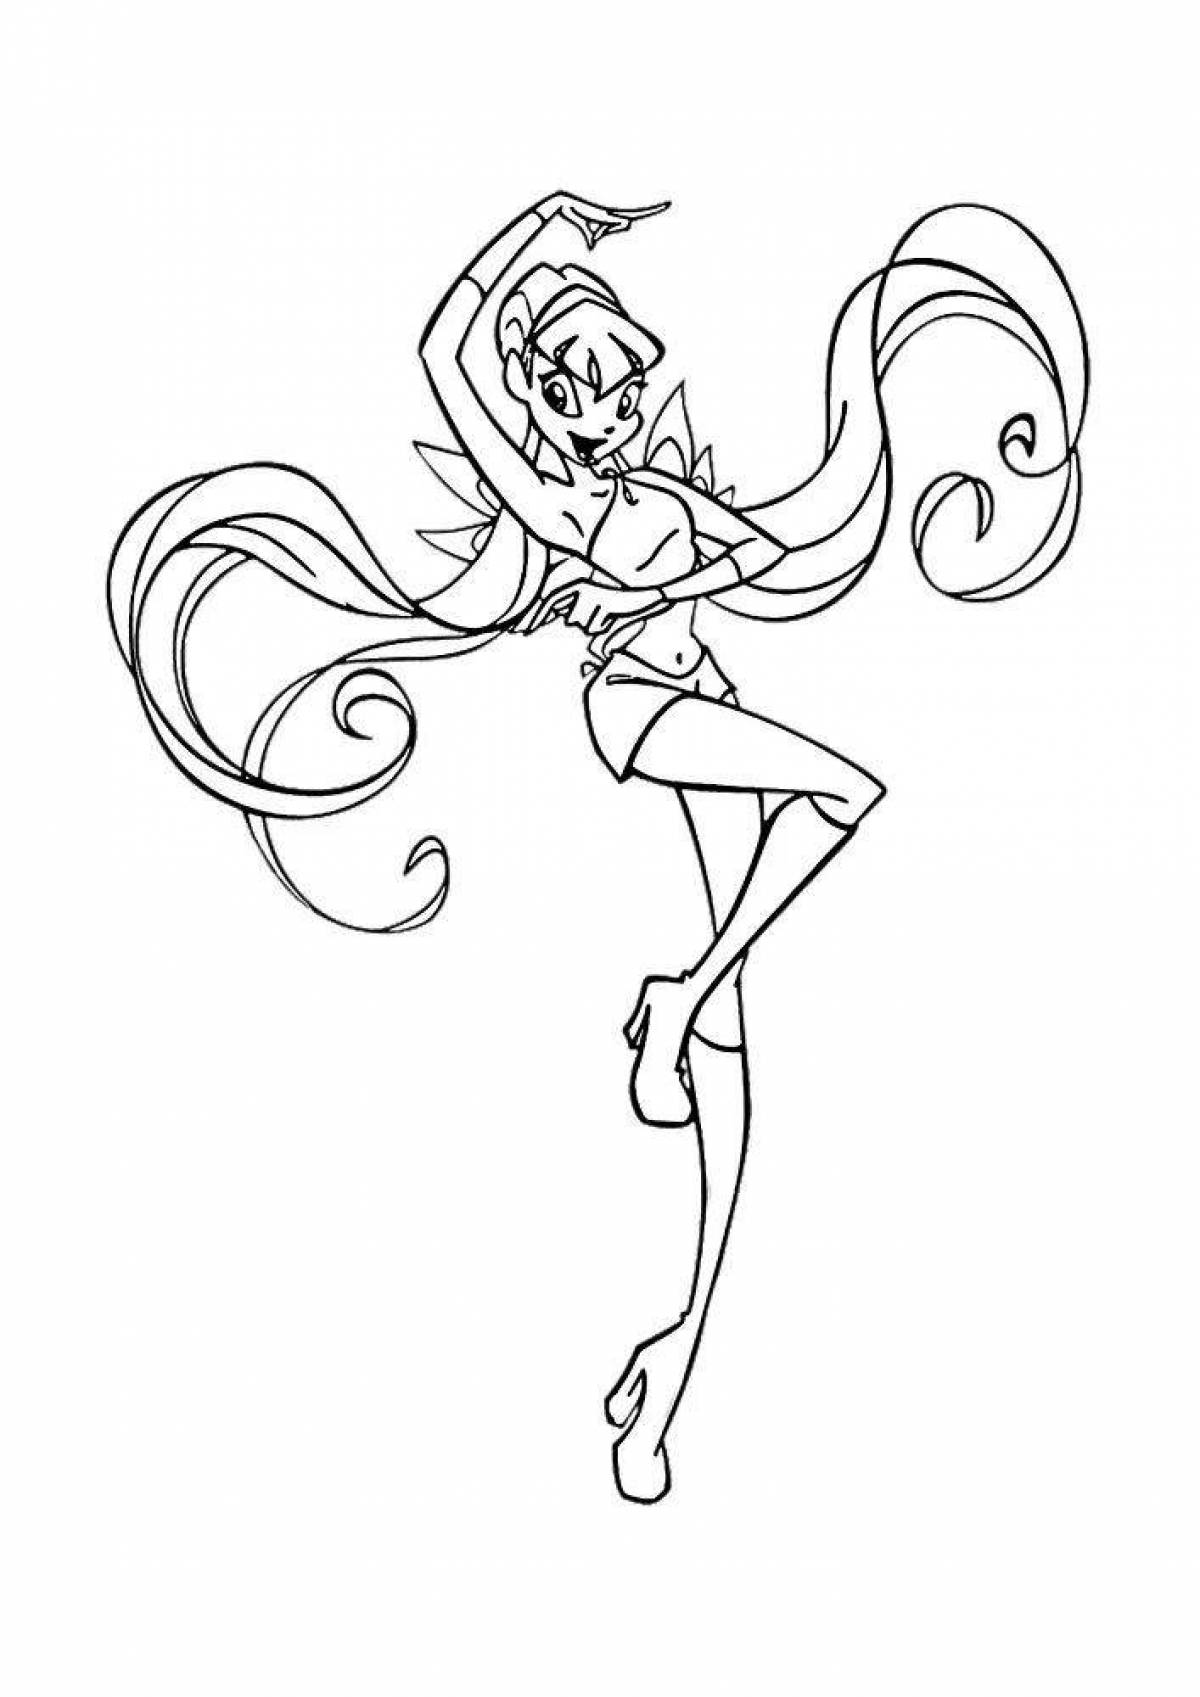 Lively charmix winx coloring